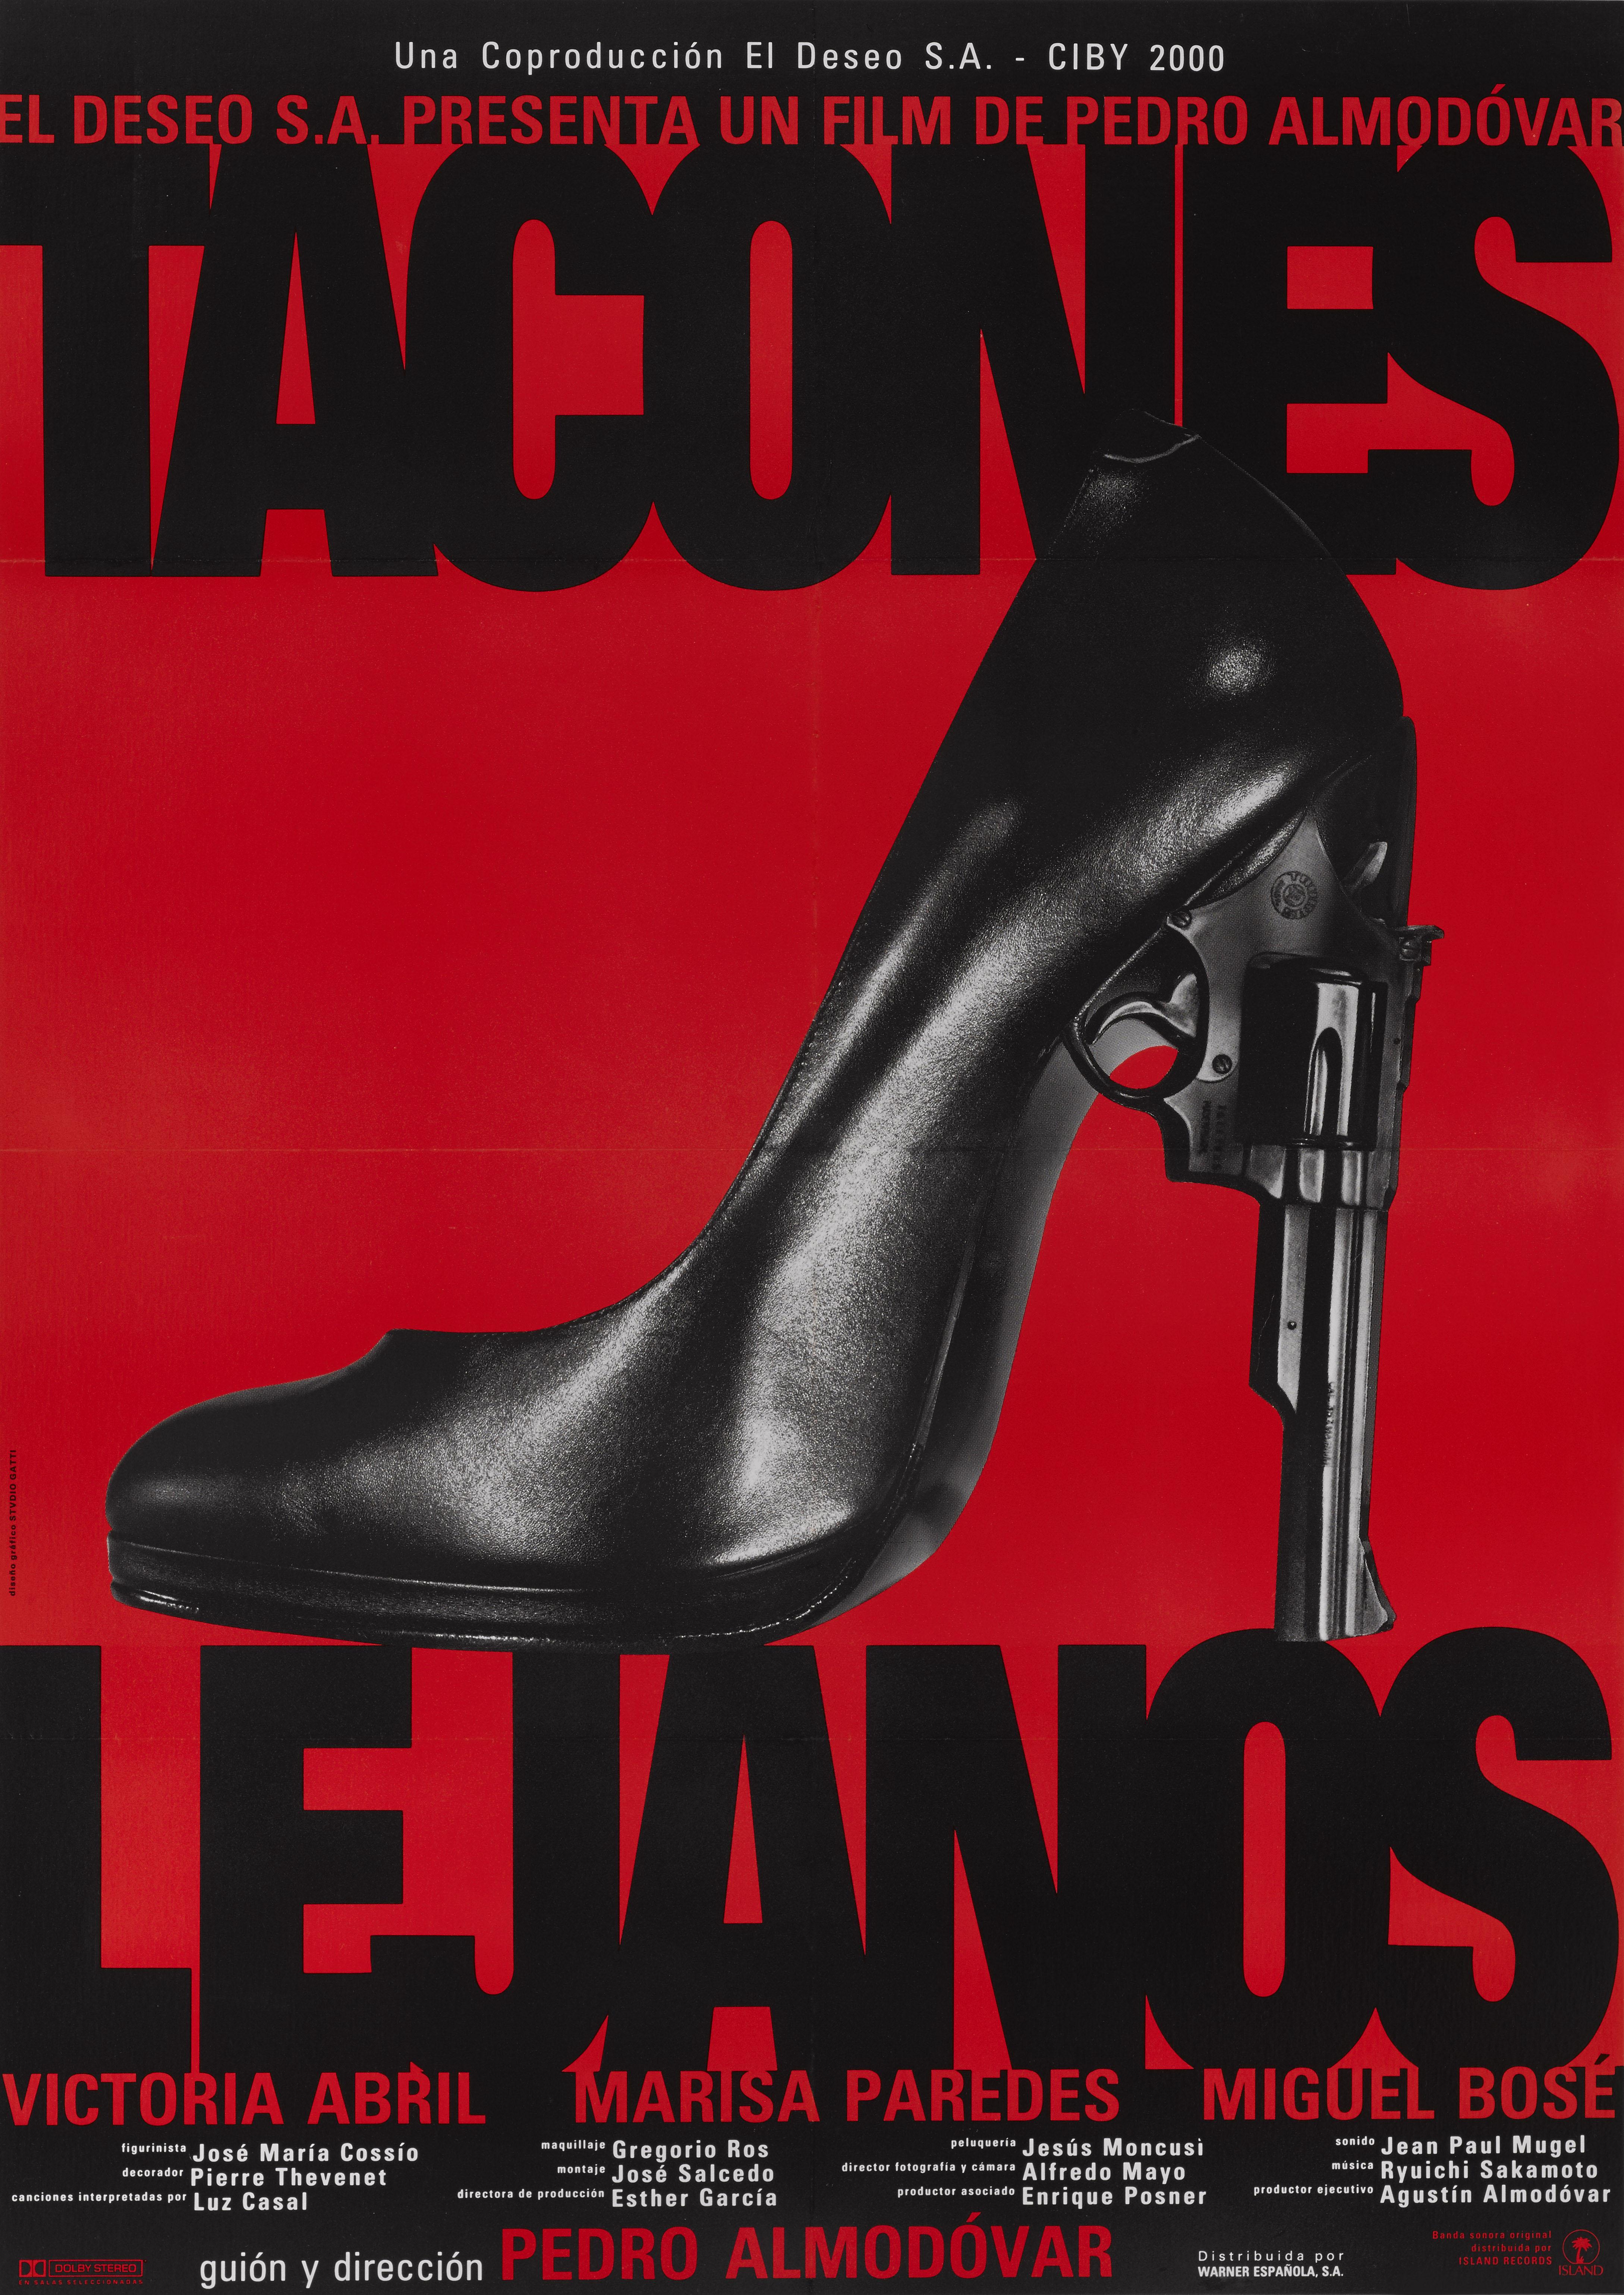 Original Spanish film poster from High Heels. This film was directed by Pedro Almodóvar, and stars Victoria Abril, Marisa Paredes and Miguel Bosé. The film focuses on the broken relationship between a mother, who had abandoned her daughter fifteen